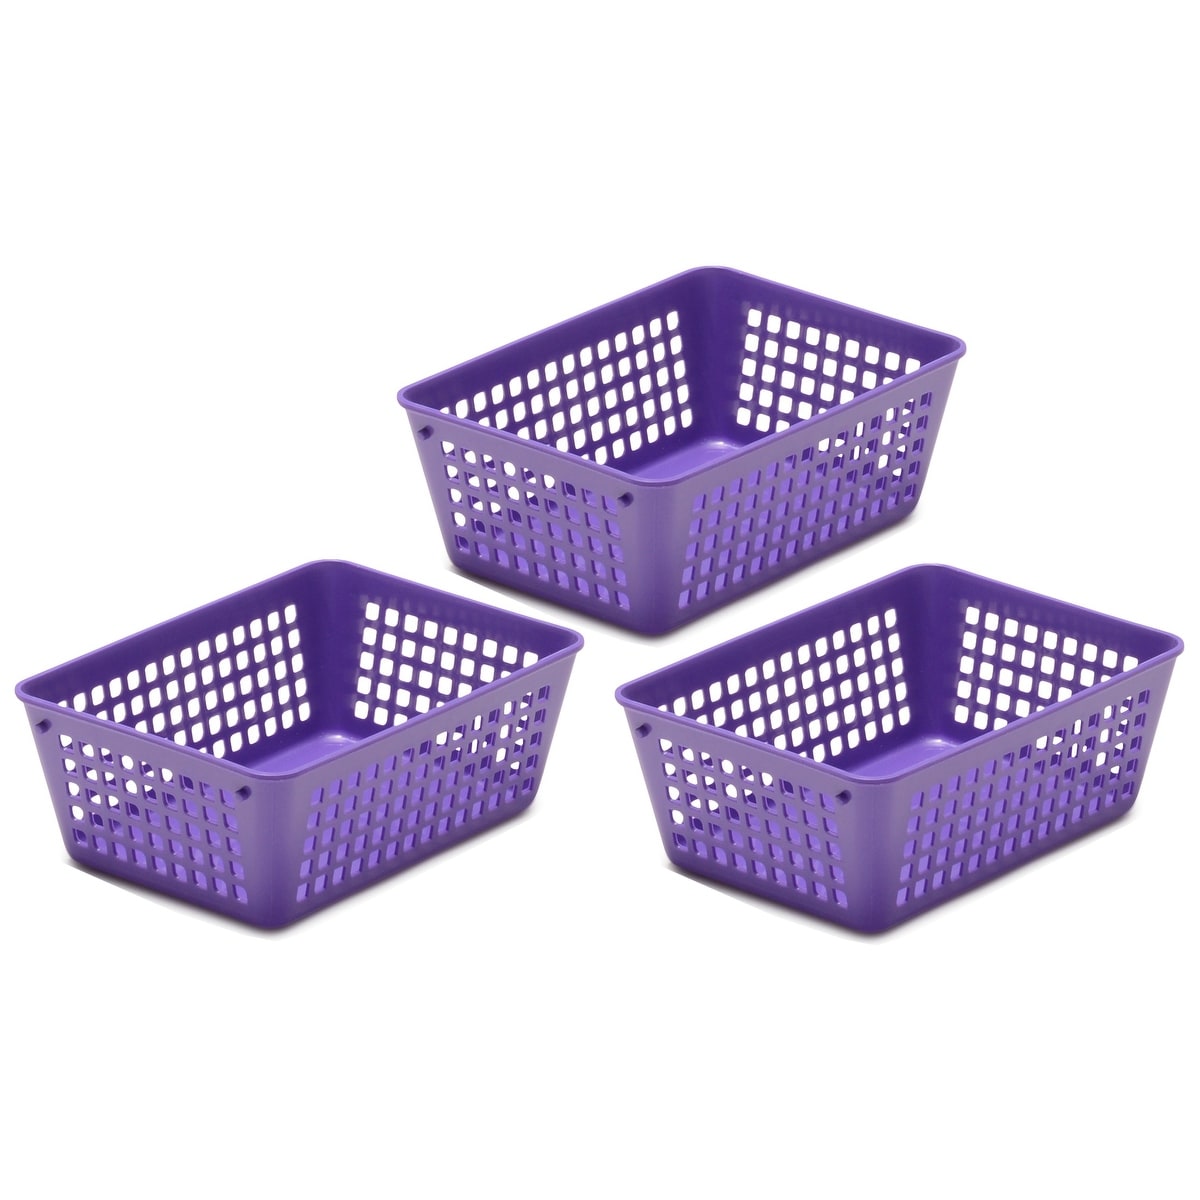 https://ak1.ostkcdn.com/images/products/is/images/direct/b77998966c94c829b4589601315c47853fb86f60/3-Pack-Plastic-Storage-Baskets-for-Office-Drawer%2C-Classroom-Desk.jpg